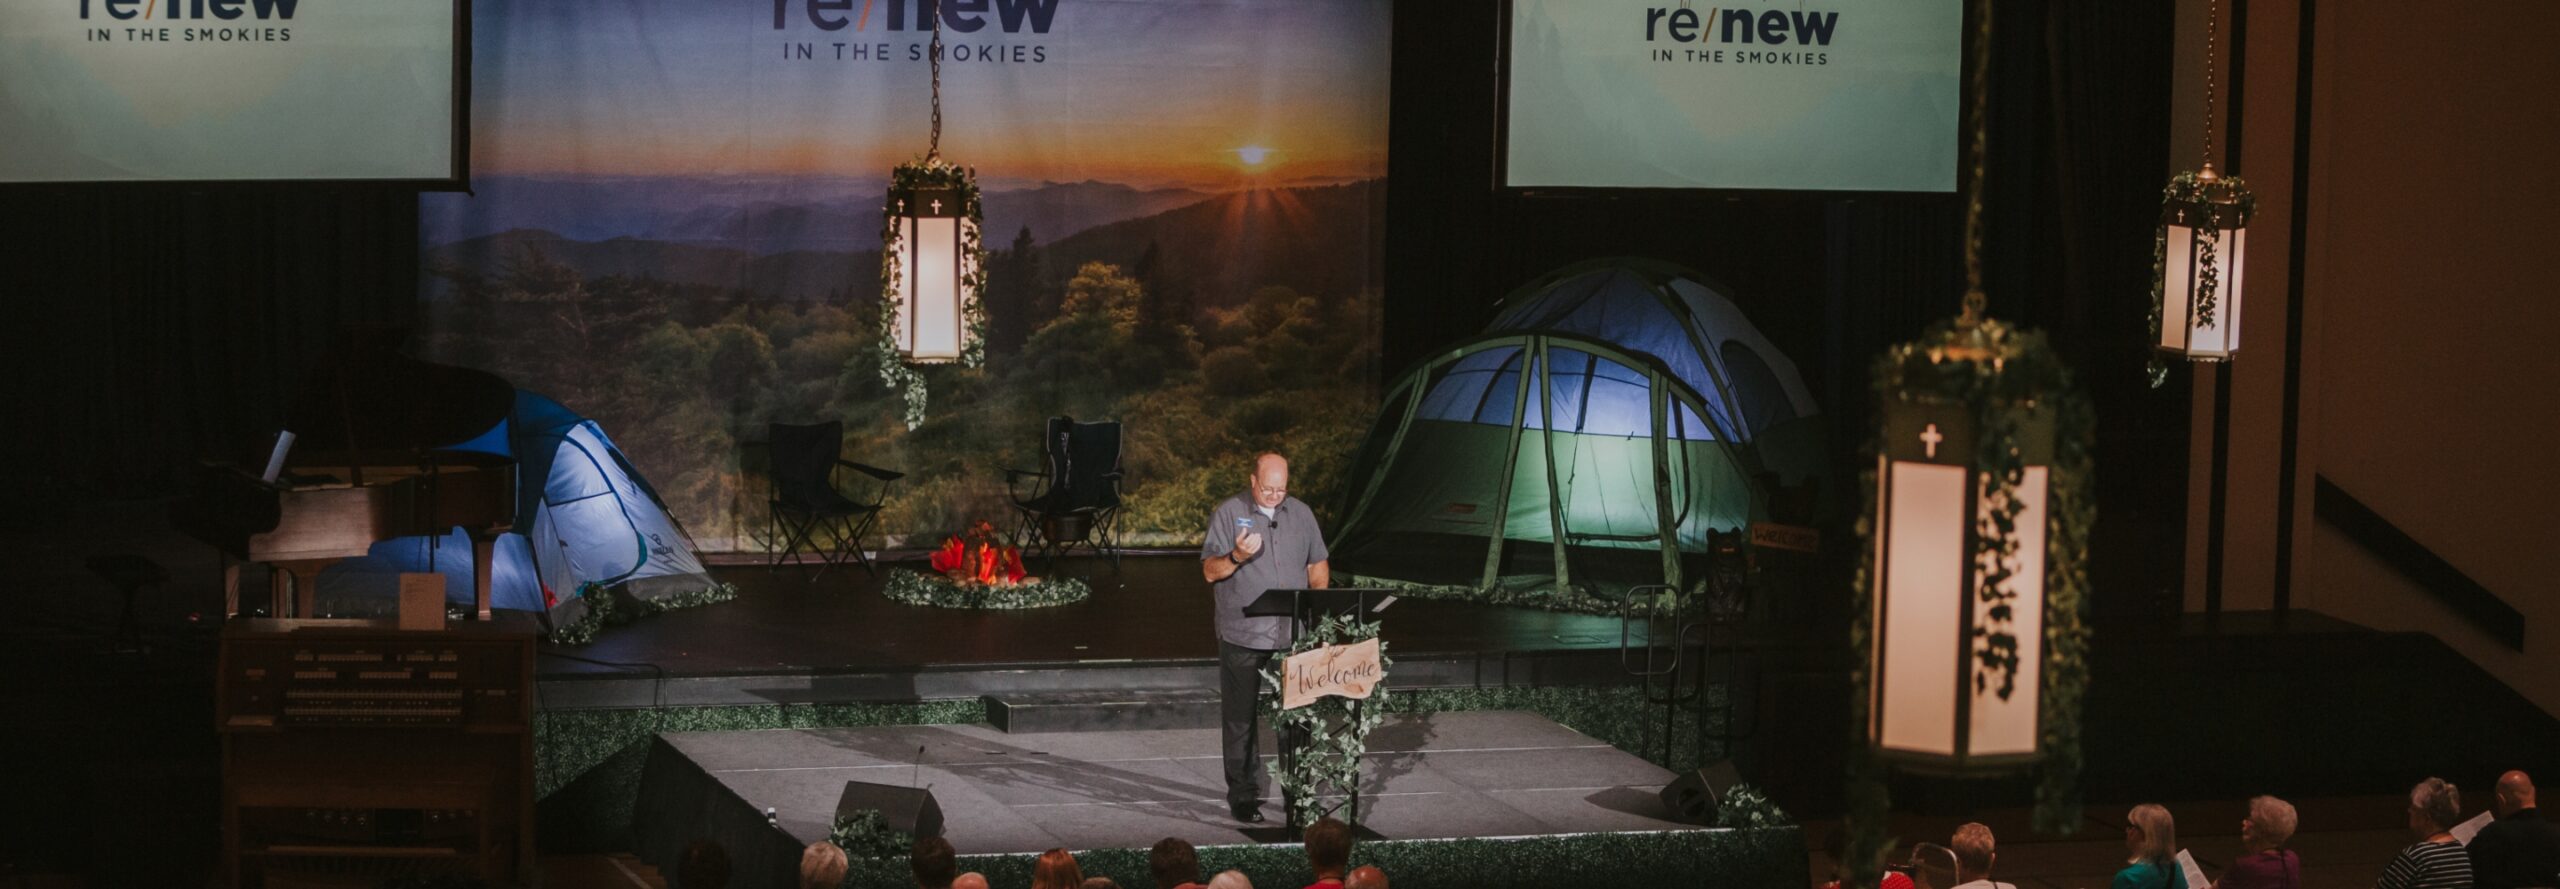 Dr. Smith leading a Bible study at Renew in the Smokies